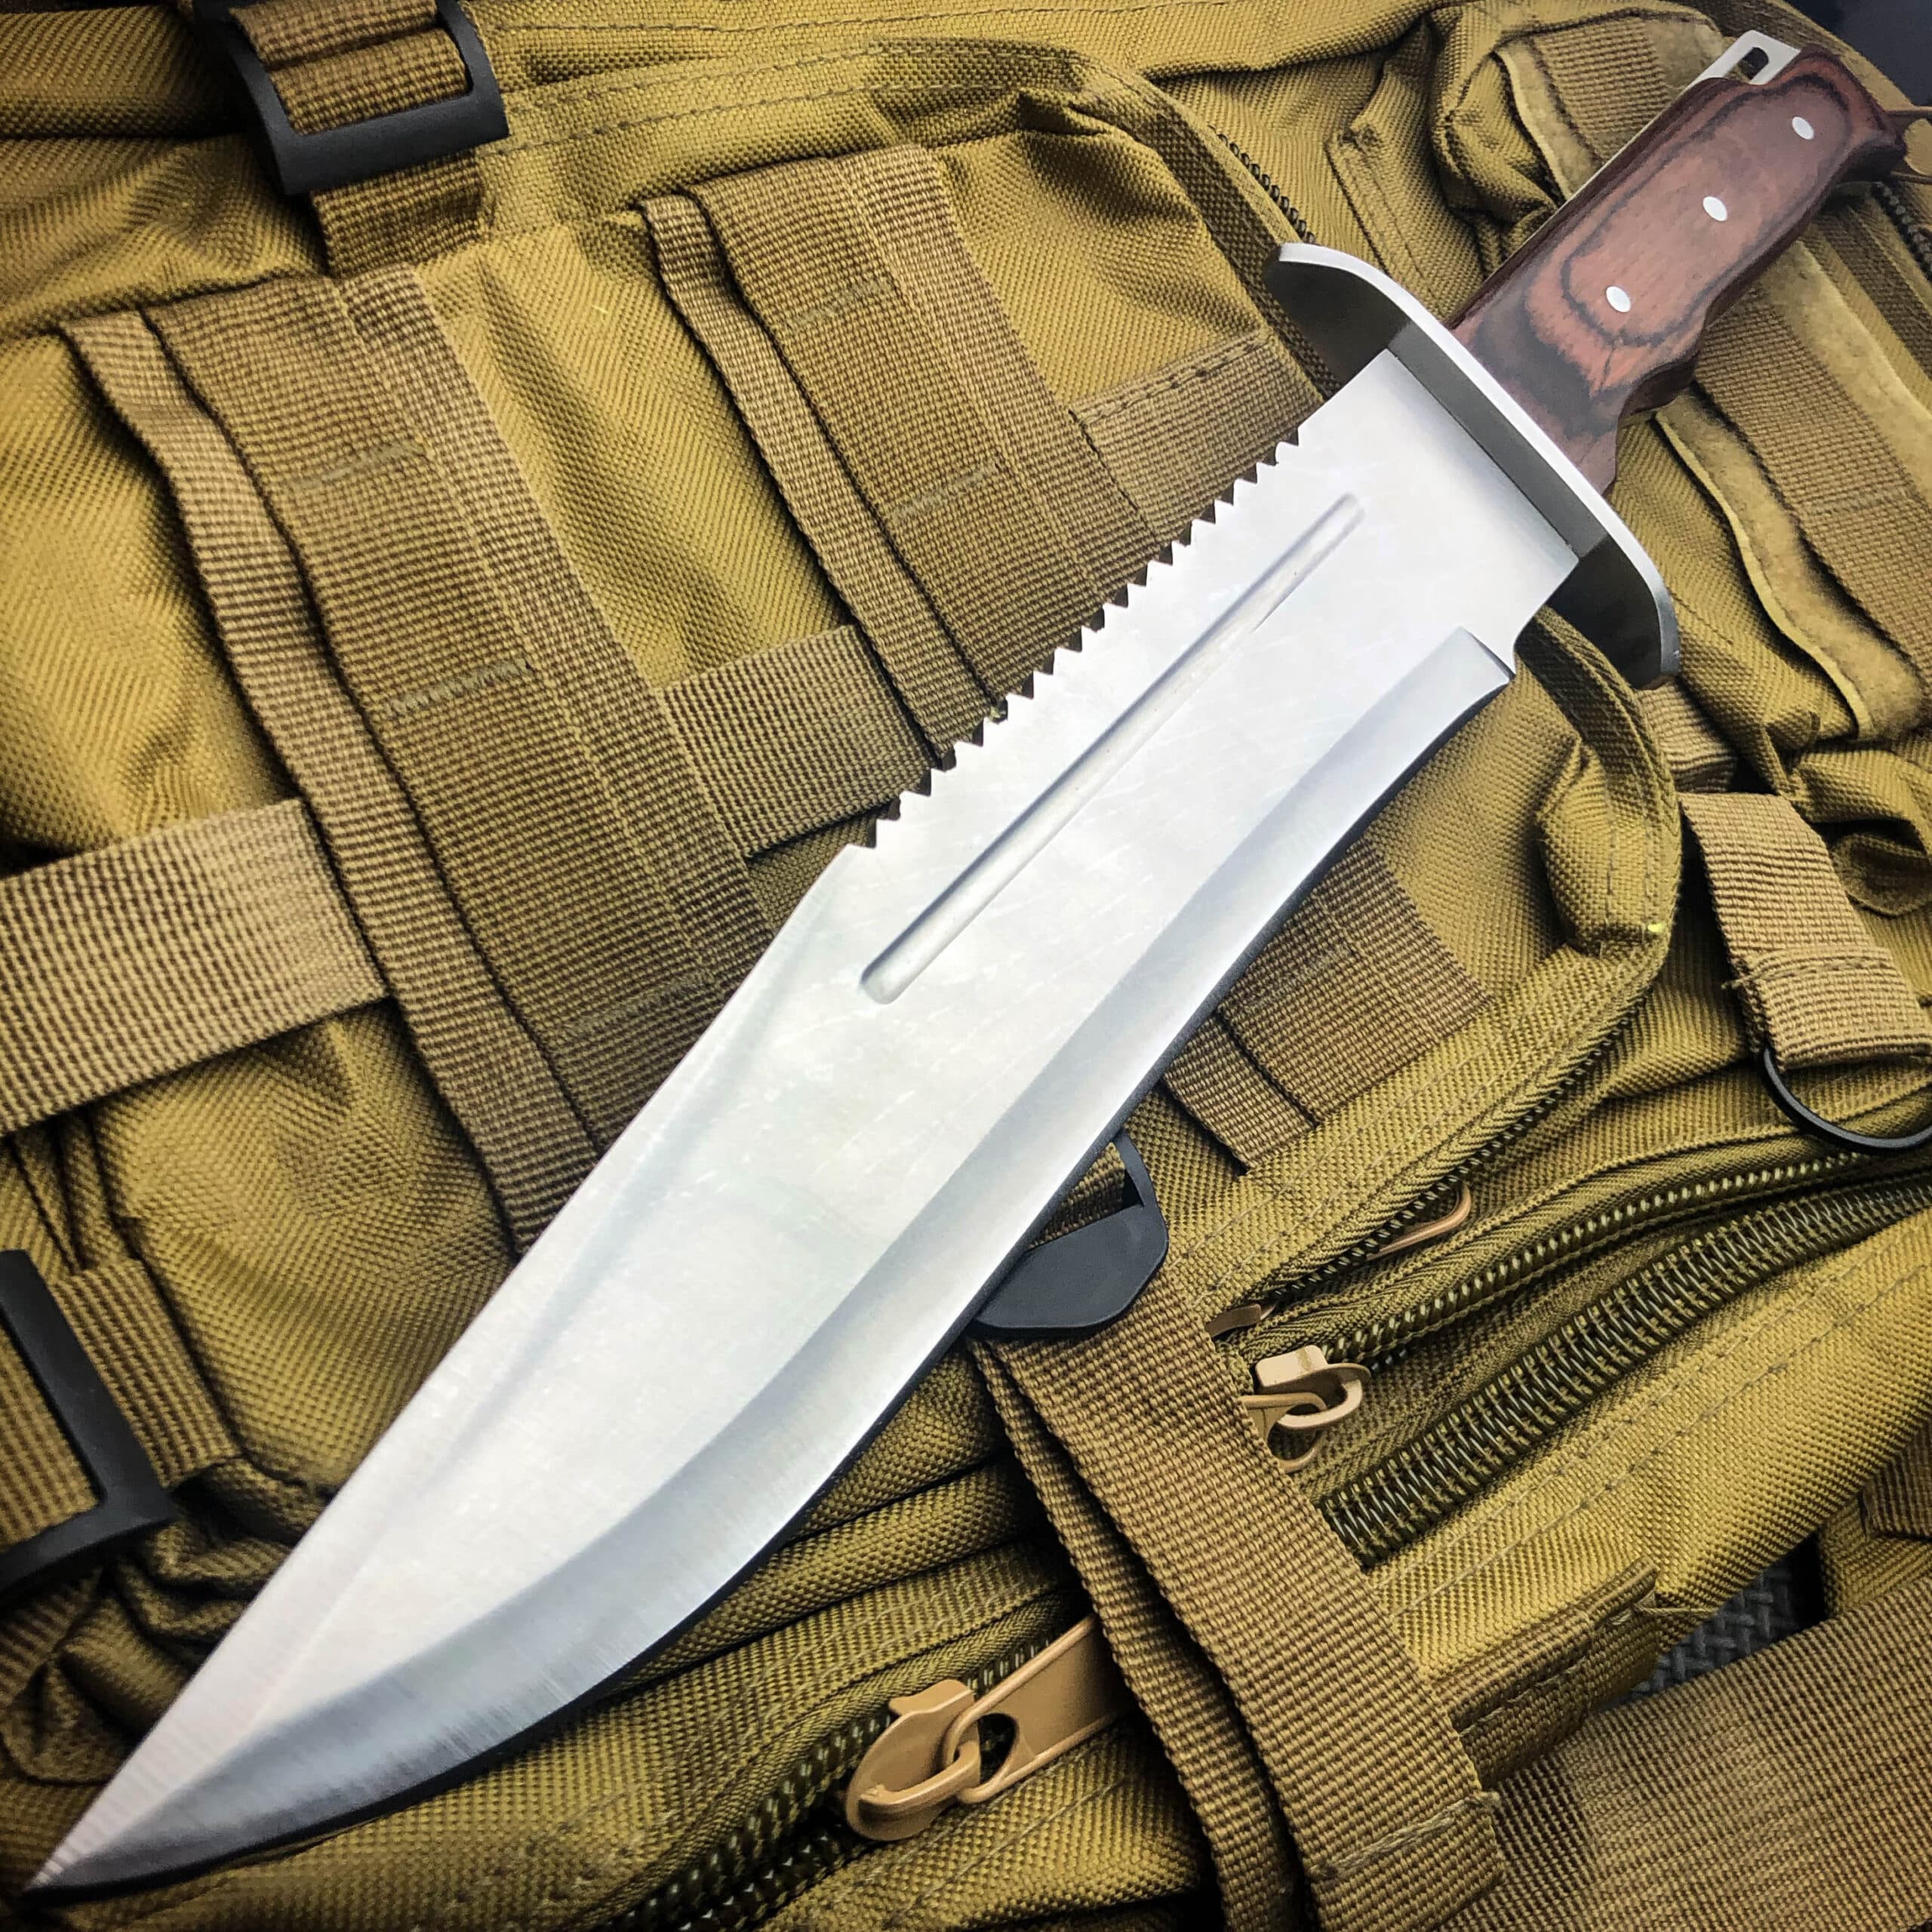 16" Full Tang TACTICAL Hunting Rambo Fixed Blade Camping Bowie Knife w Sheath